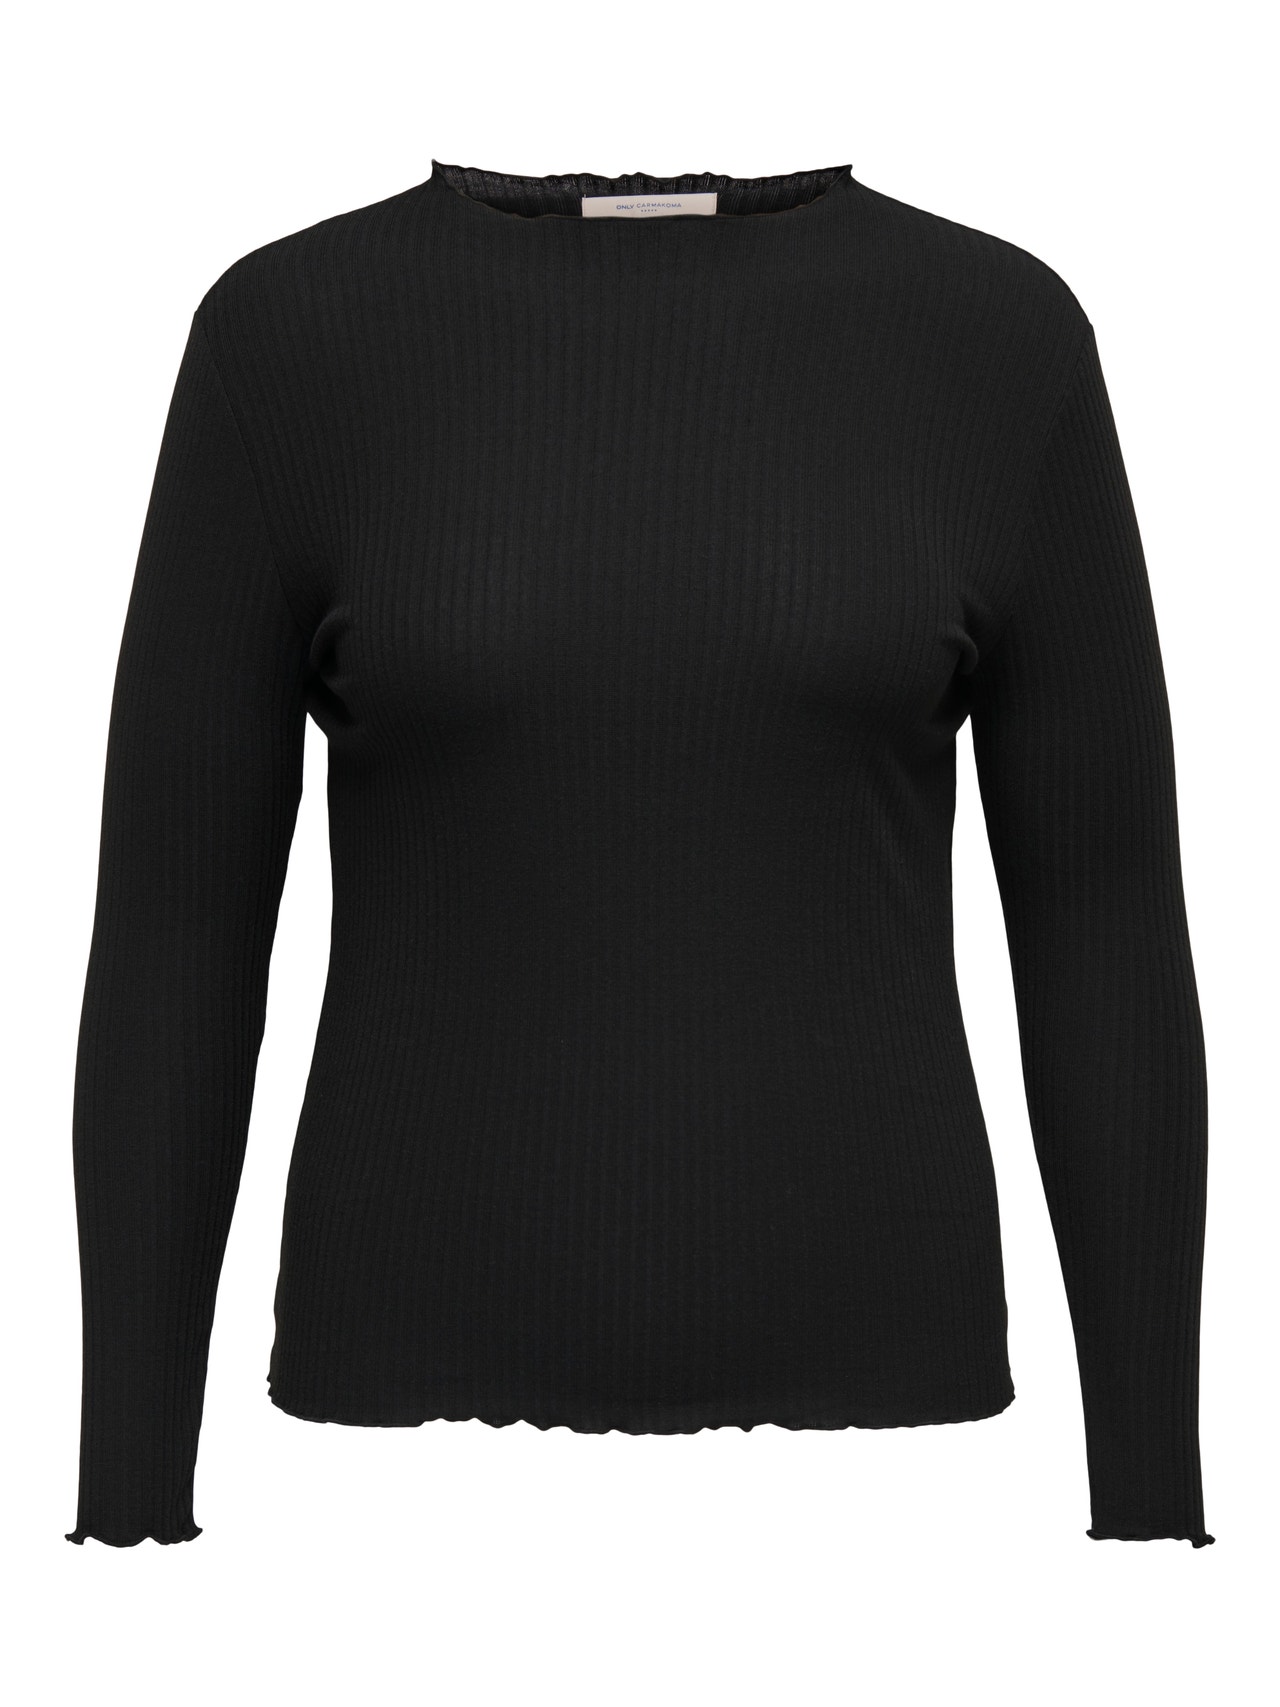 ONLY Curvy Top -Black - 15211495